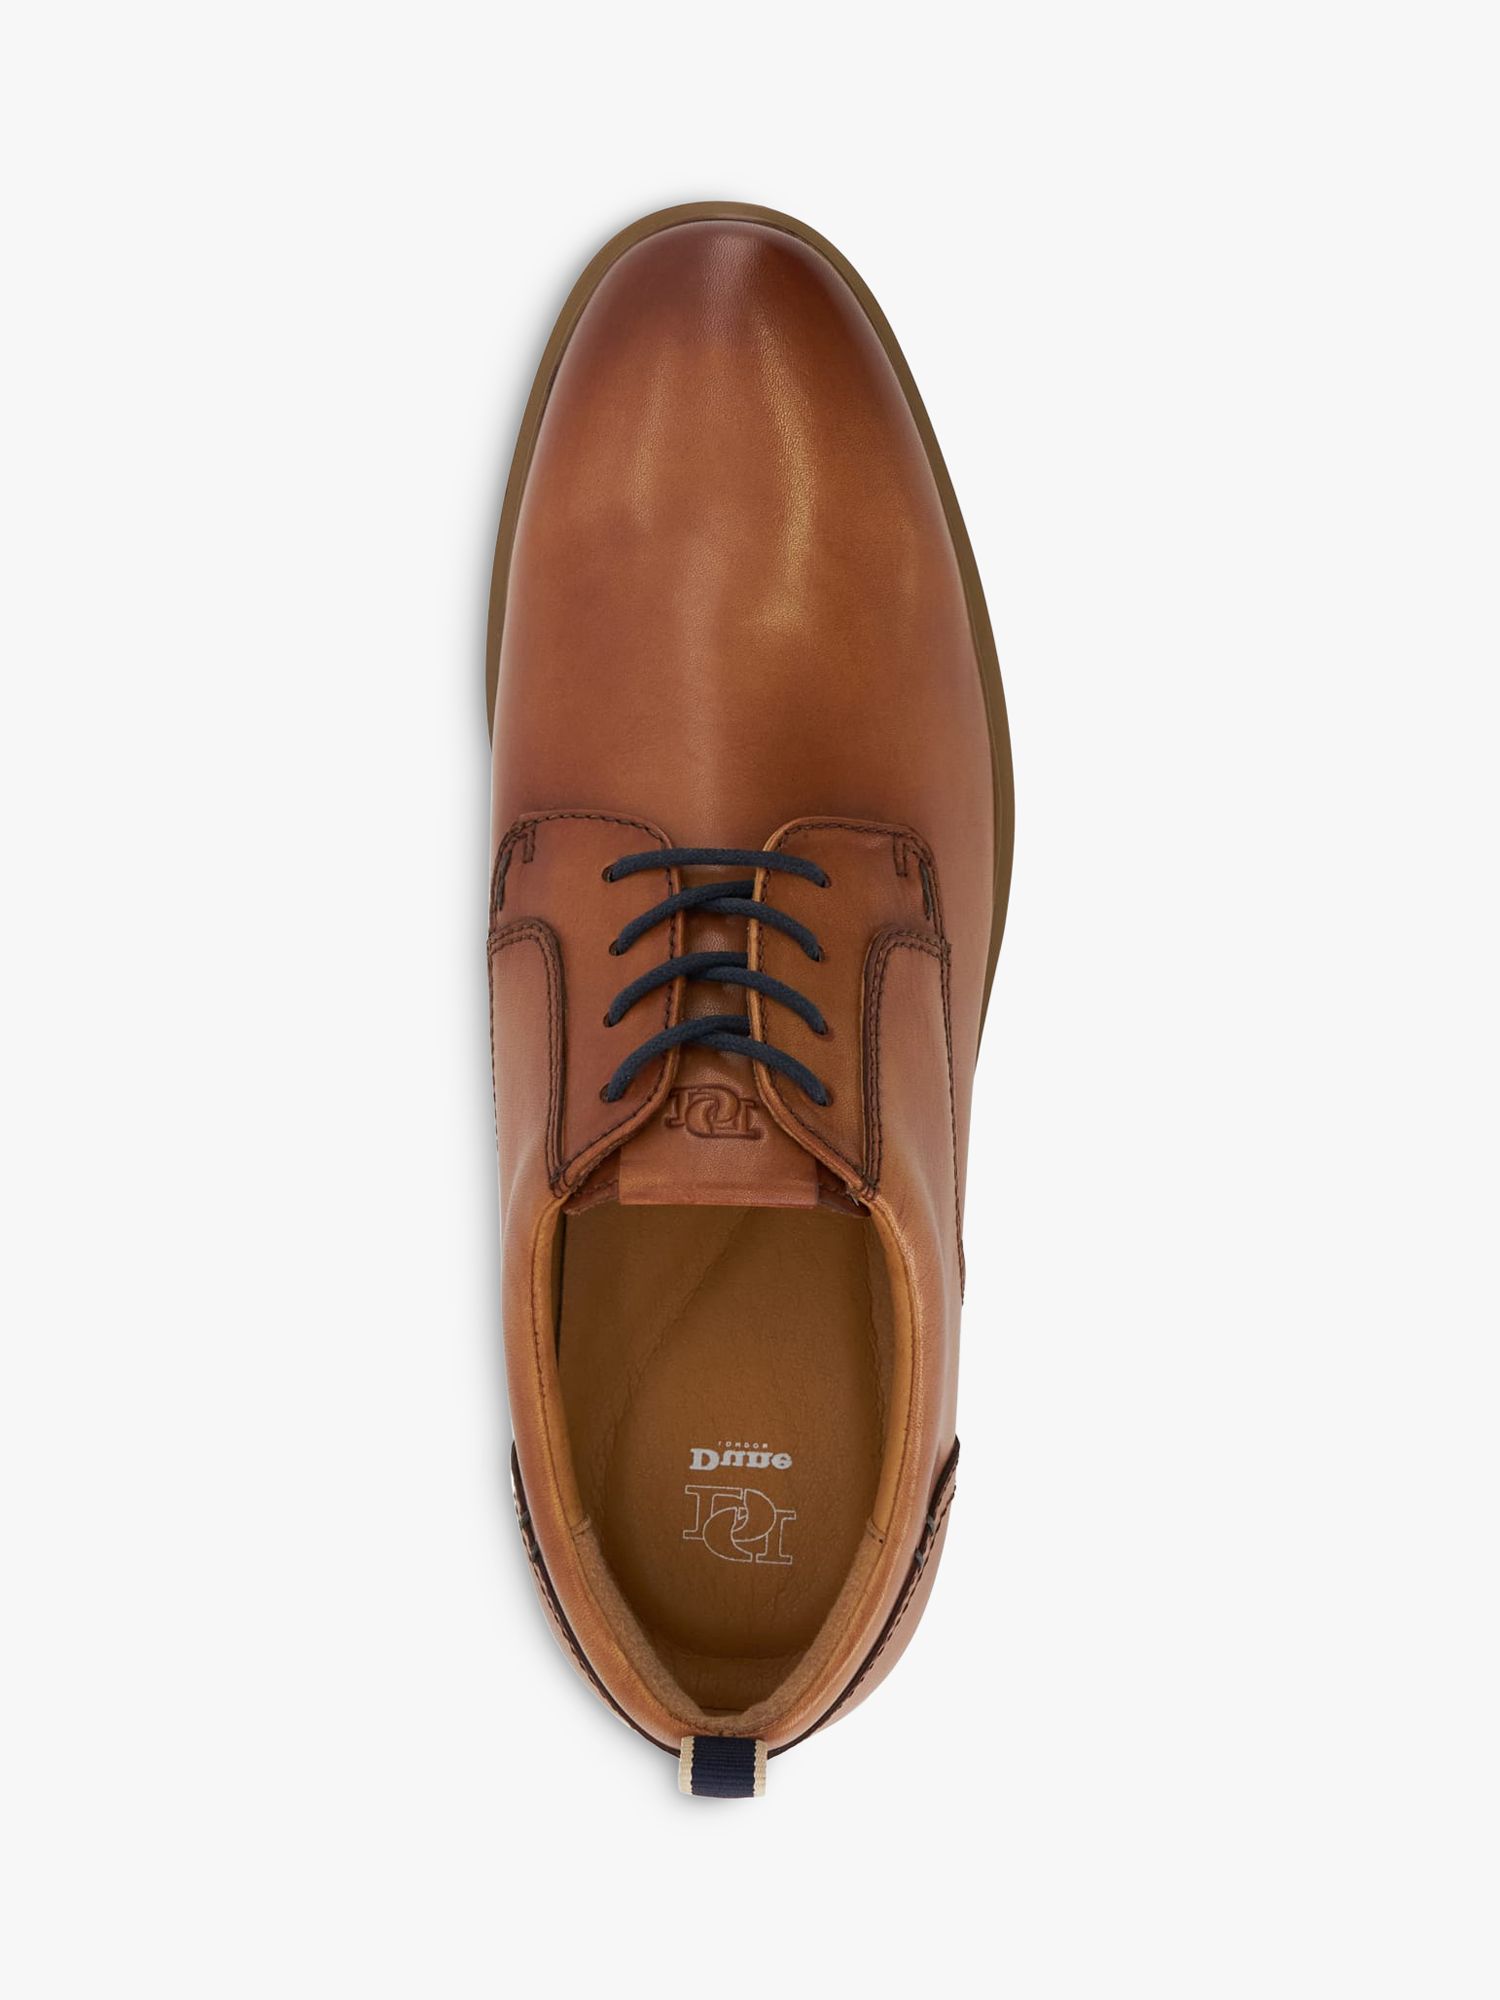 Dune Blaksley Leather Lace-Up Shoes, Tan, 9